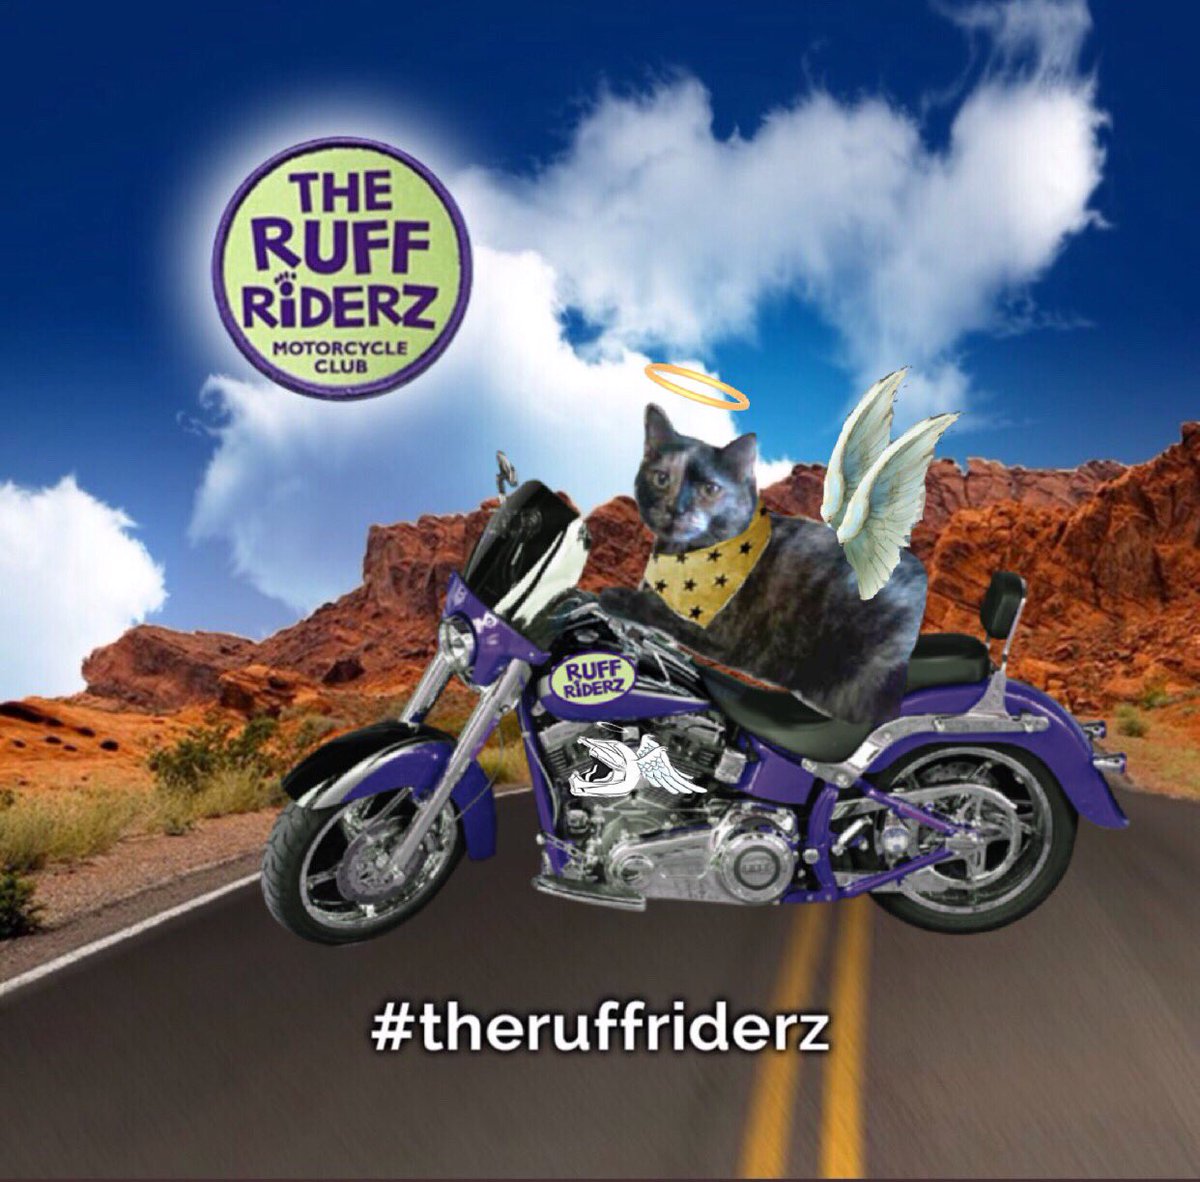 @InokumaT @carrotfiles @ThorSelfies @Ottogingerboy @3coolkatz @debsspencer1 Angel Cinni: Hello Kolohe and Keahi. I haven't been notified by anyone stating they're my team leader for #TheRuffRiderz. I've been one of the #CloudRiderz since going OTRB in December 2018 and I'm not sure if that group is considered a team.